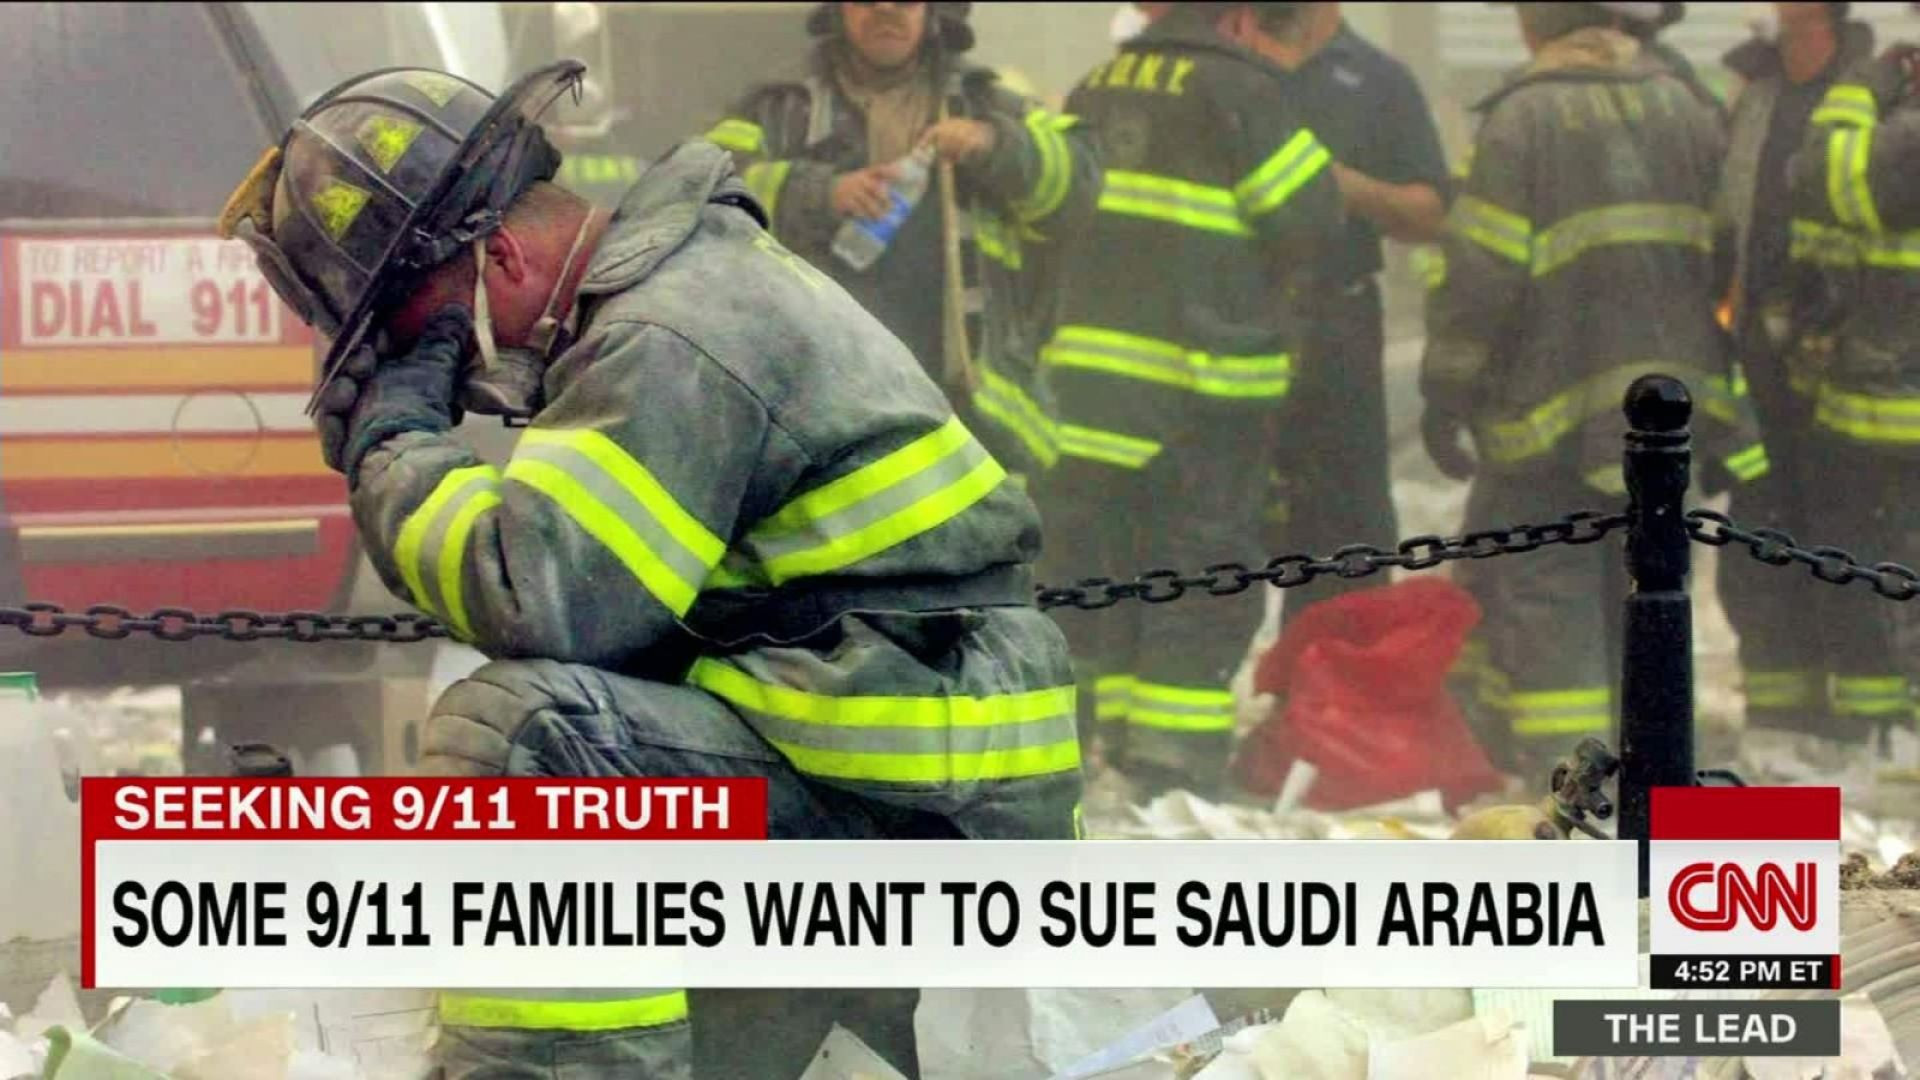 ⁣MUST SEE! THE DANCING SAUDIS DID IT! ₪ MEDIA'S NOW PUSHING THAT SAUDI ARABIA INVOLVED IN 911!